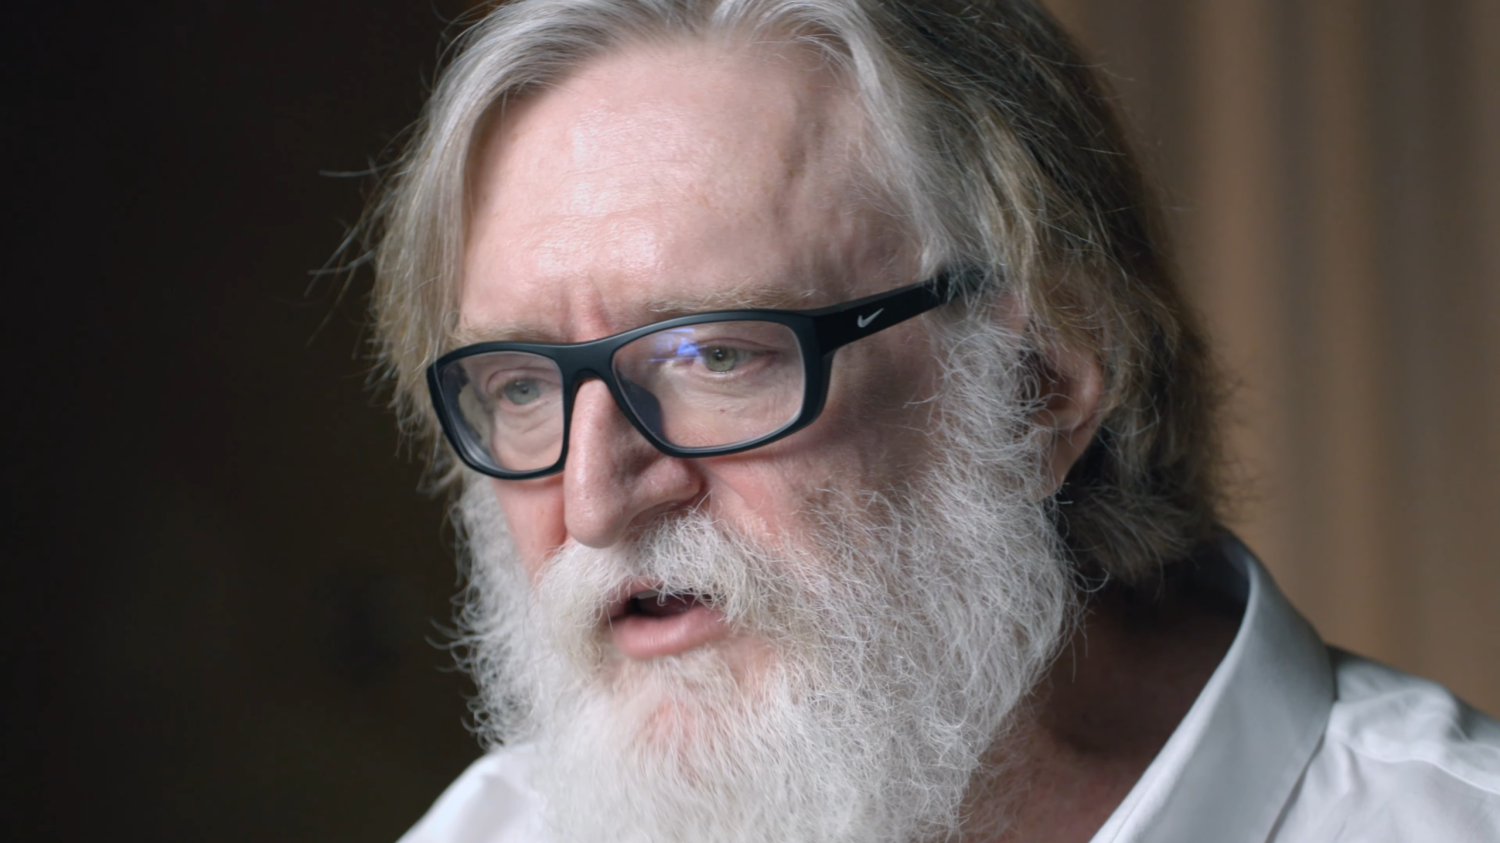 Gabe Newell Answers Reports Of Microsoft Purchasing Valve